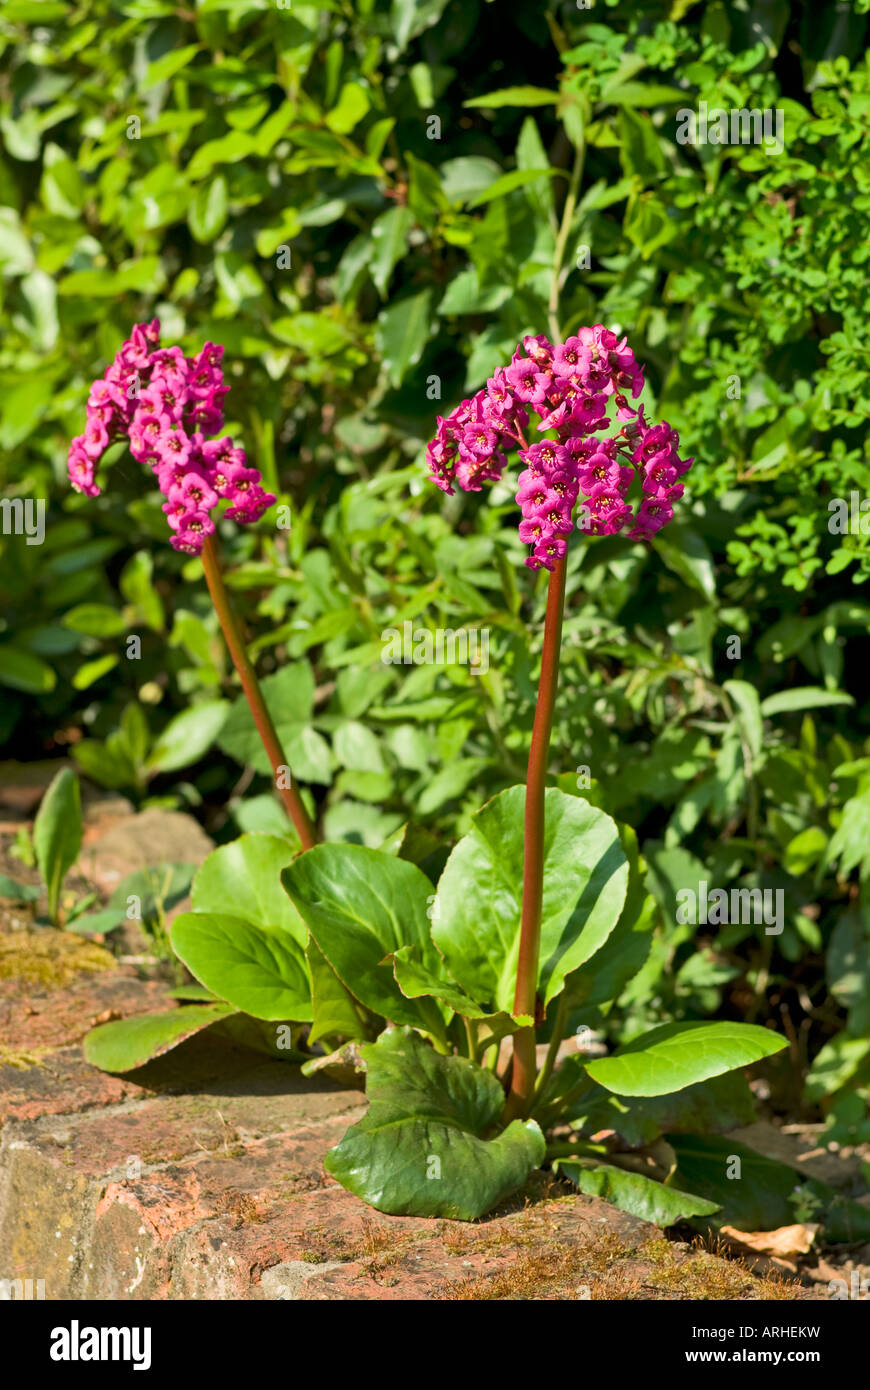 Two flower heads of bergenia cordifolia in a garden border backed by shrubs Stock Photo